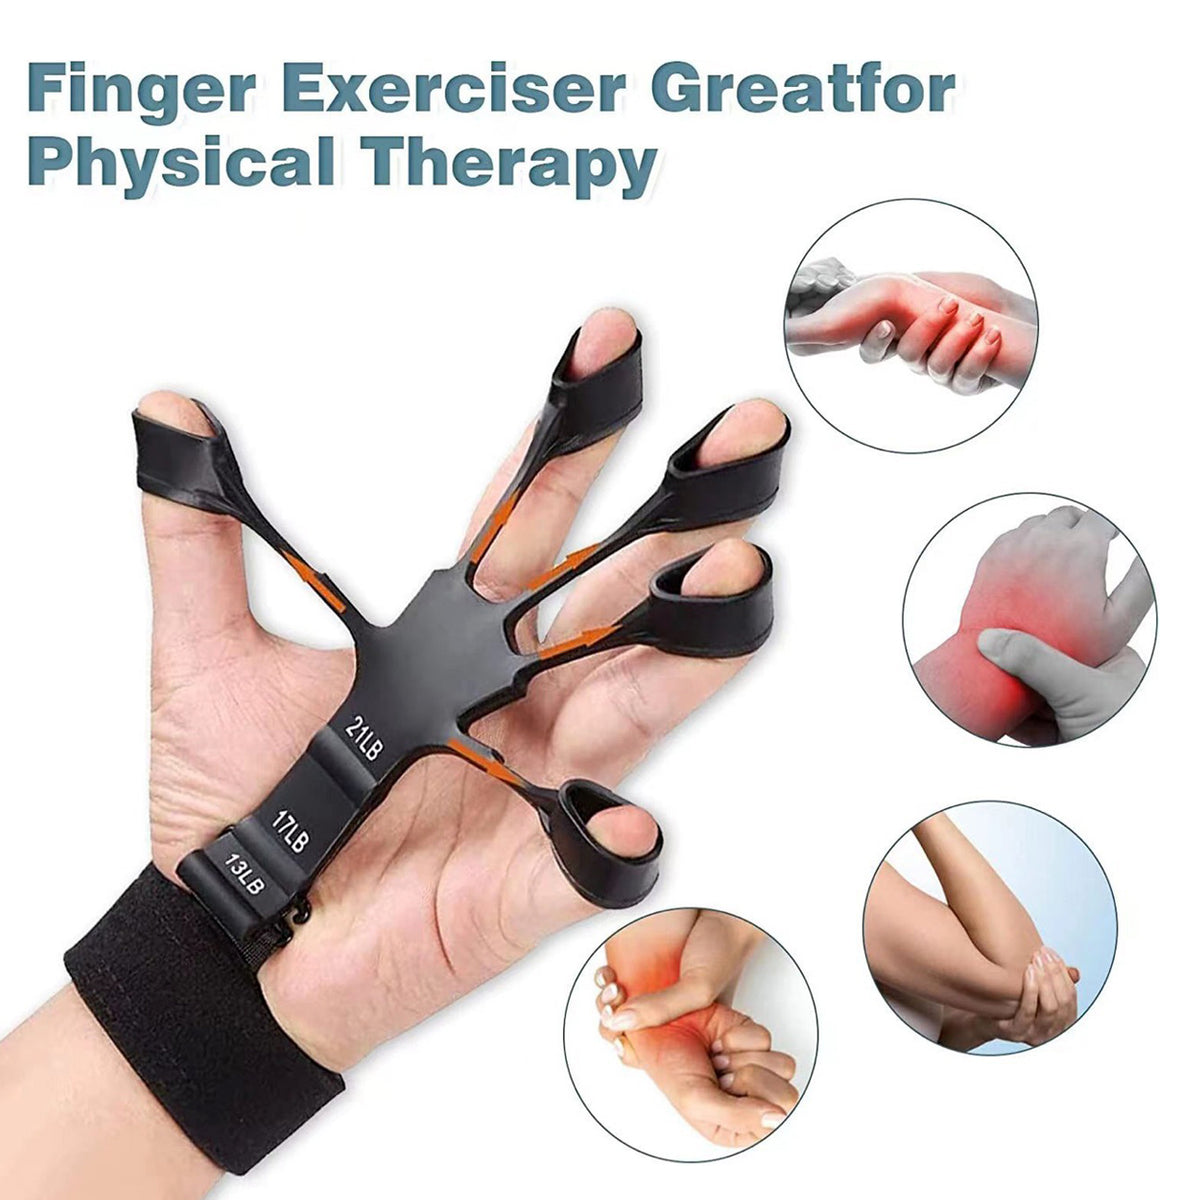 Finger strength and stretch trainer